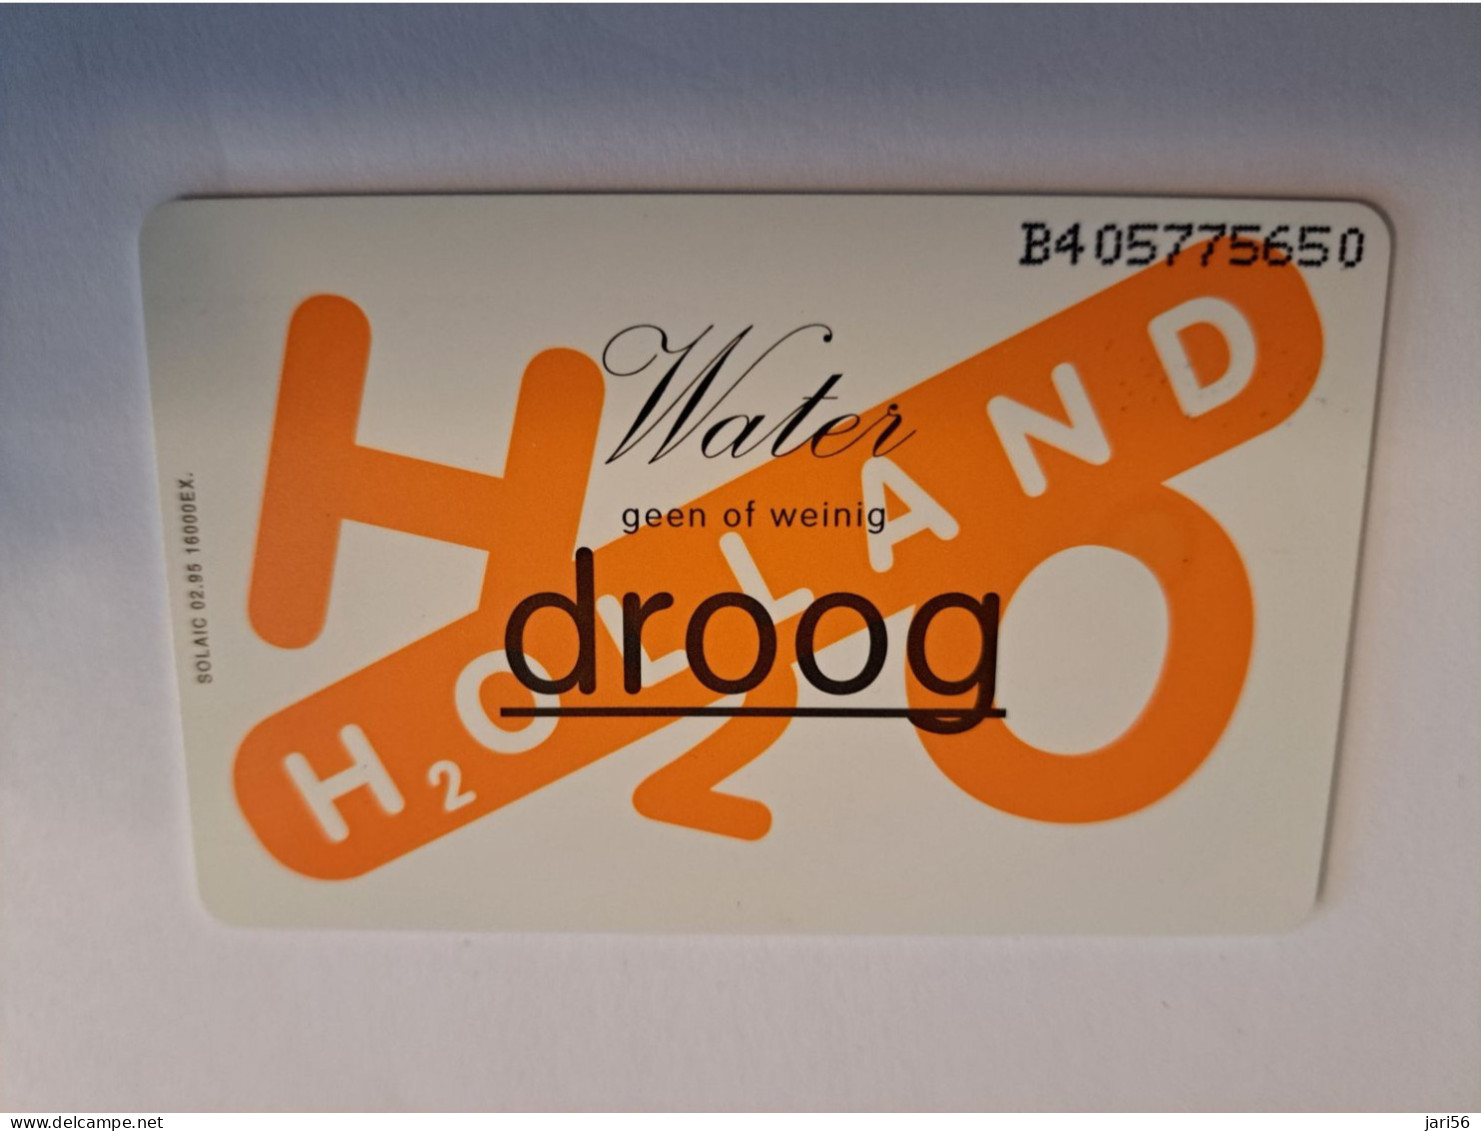 NETHERLANDS  HFL 1,00    CC  MINT CHIP CARD   / COMPLIMENTSCARD / FROM SERIE / MINT   ** 15954** - [3] Sim Cards, Prepaid & Refills